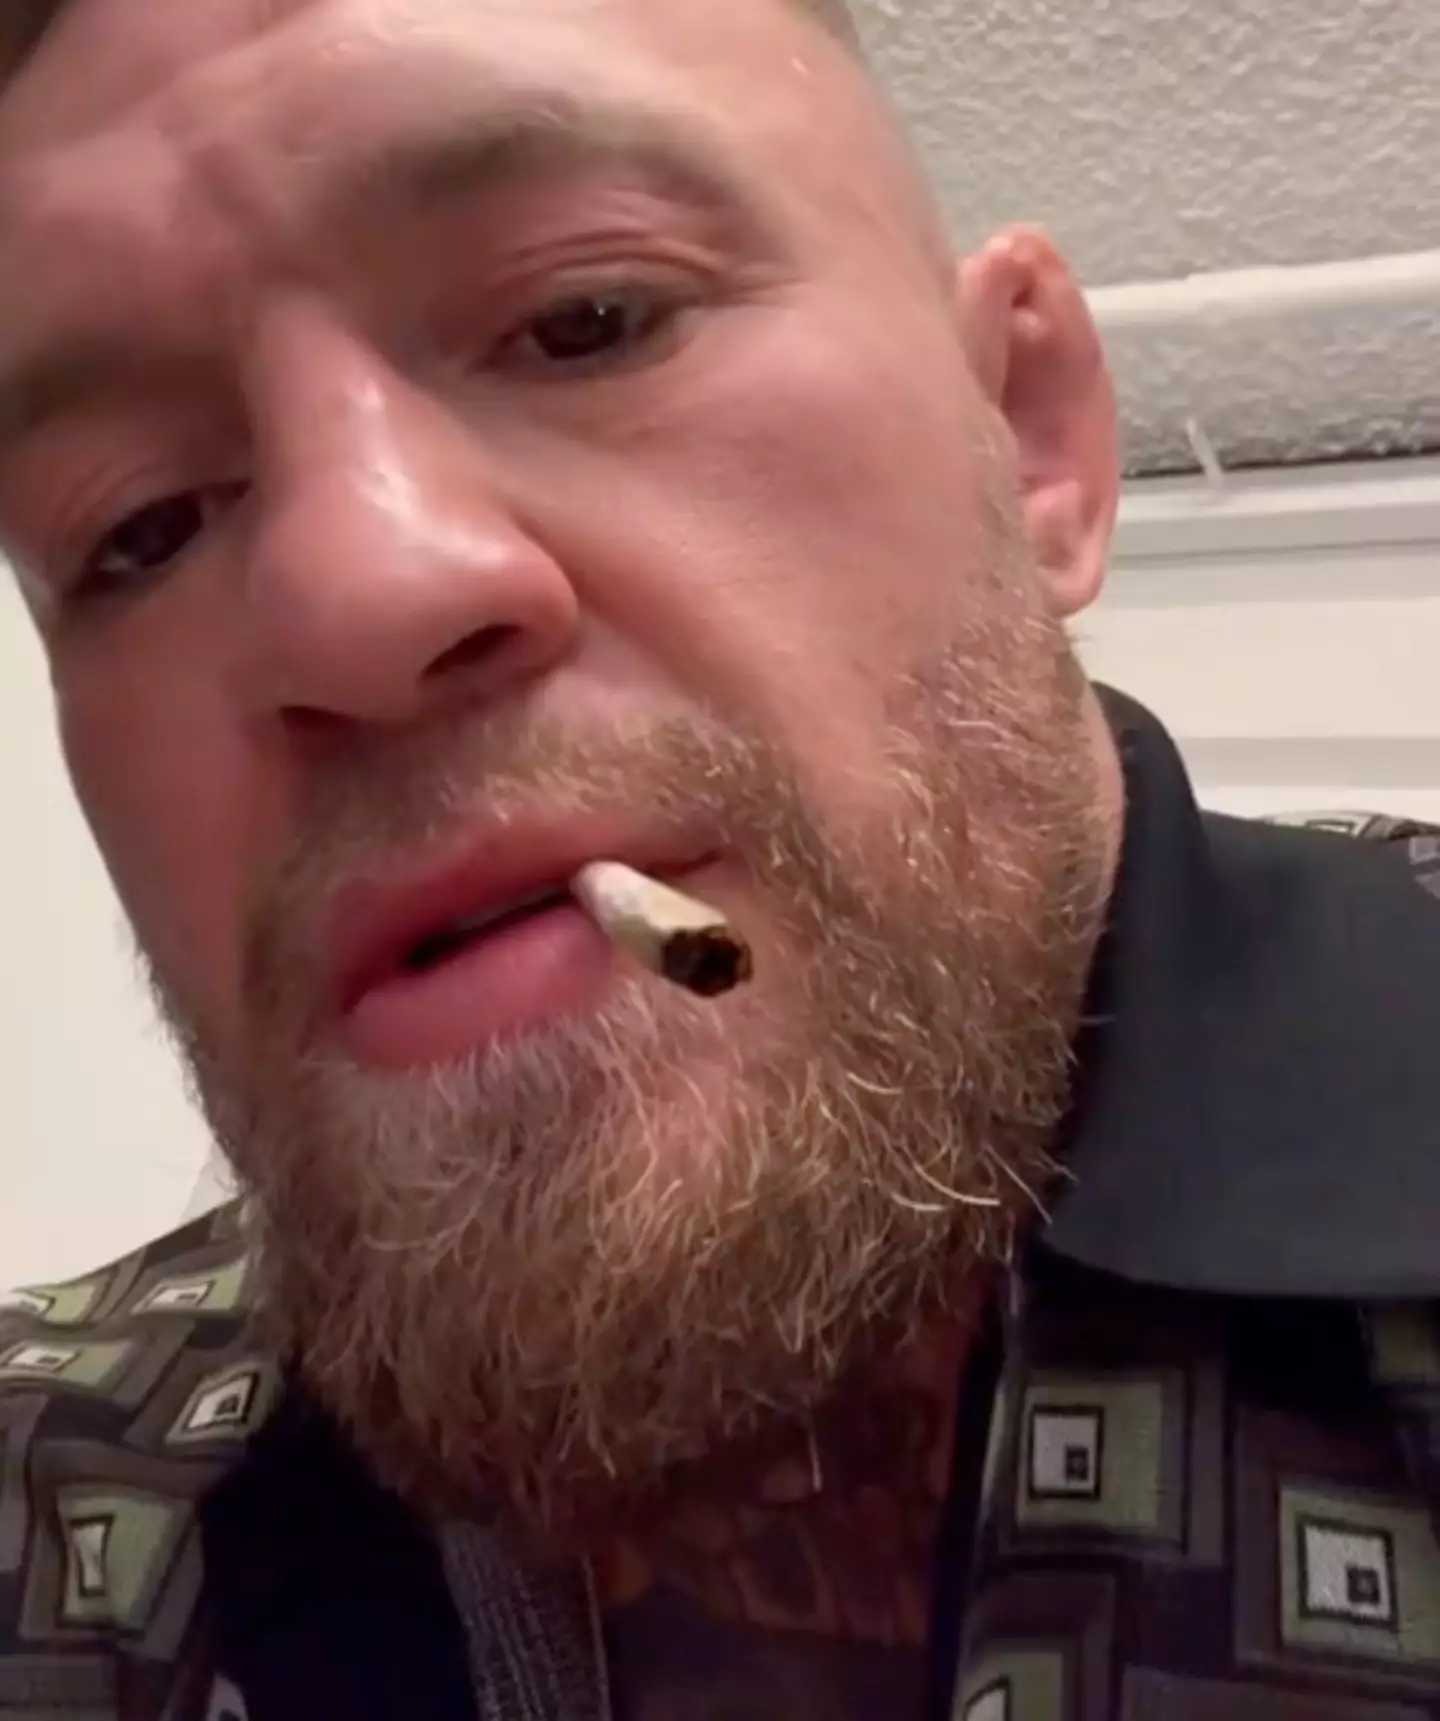 Some fans are worried after McGregor appeared to be smoking a joint.